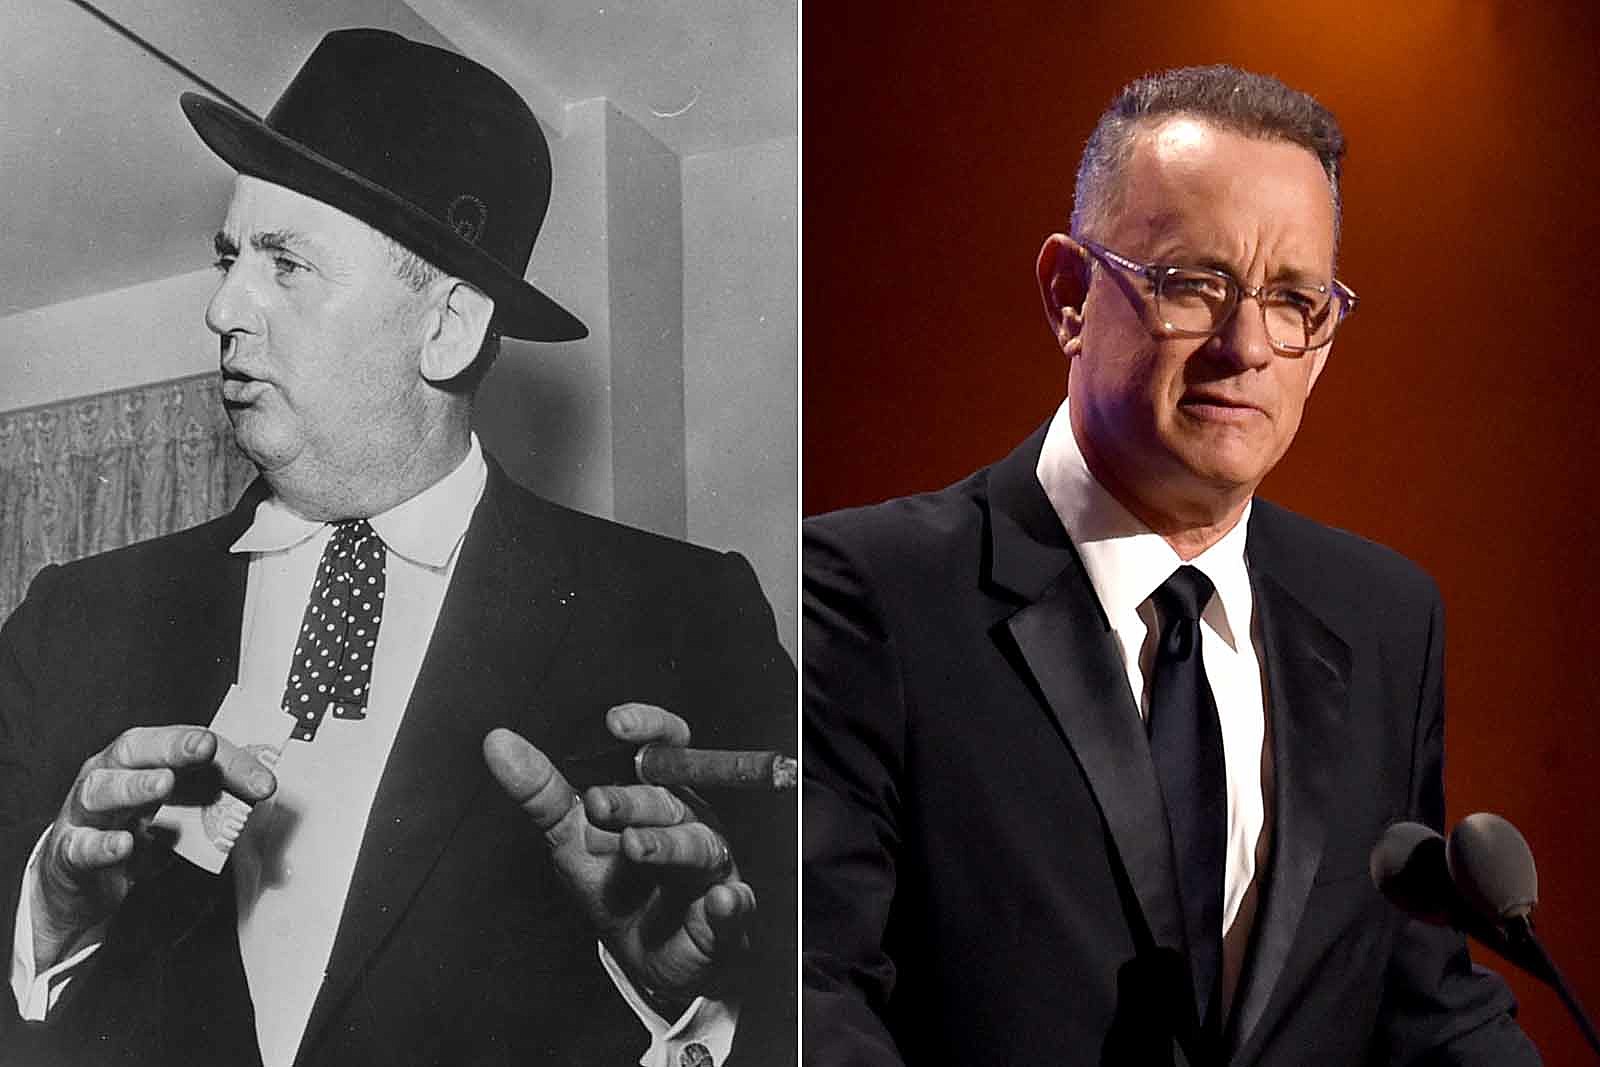 Tom Hanks to Play Elvis Presley's Manager in New Movie